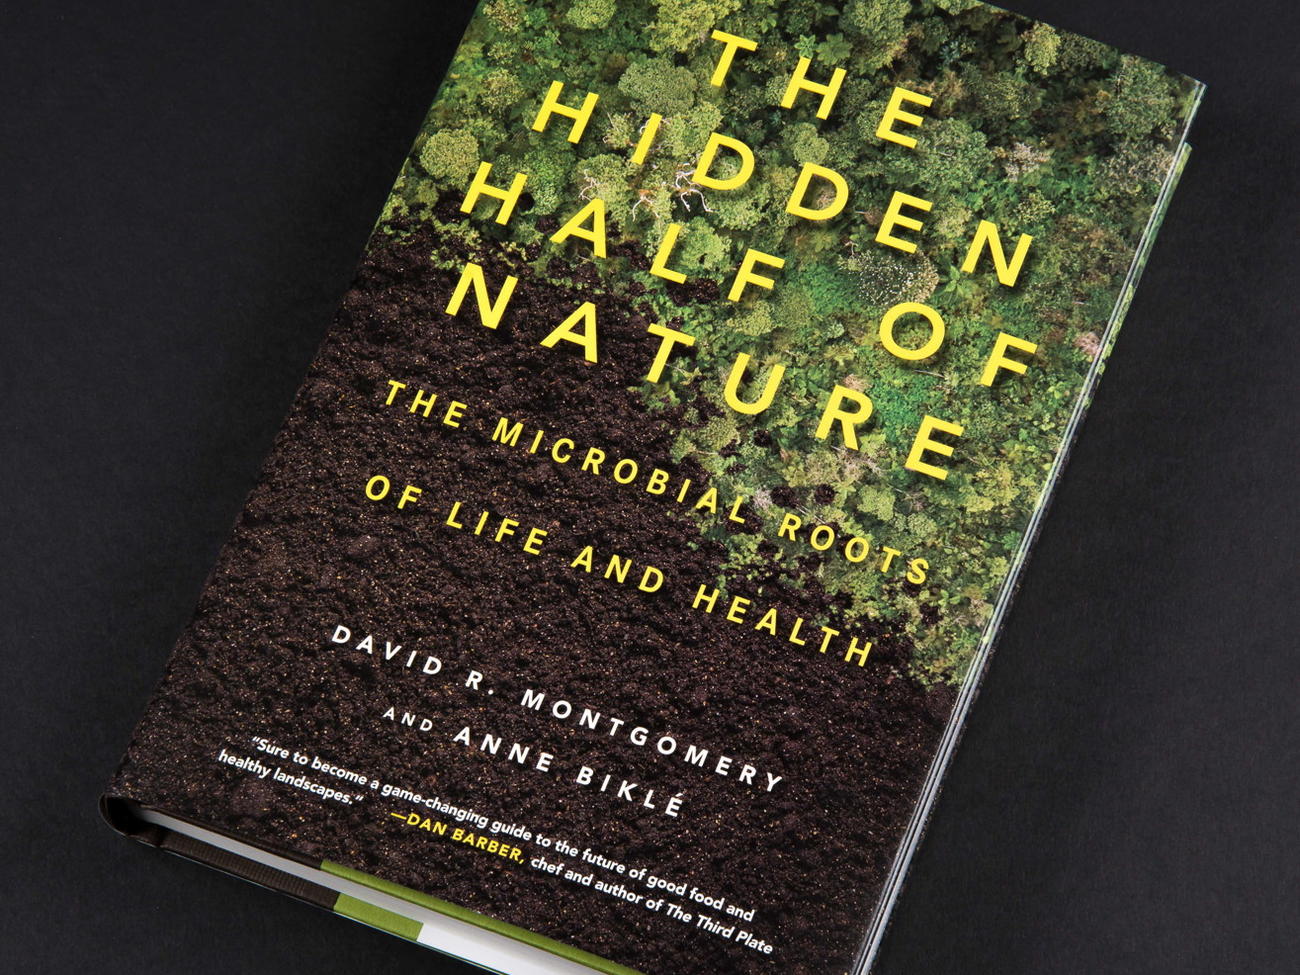 Book review: The Hidden Half of Nature